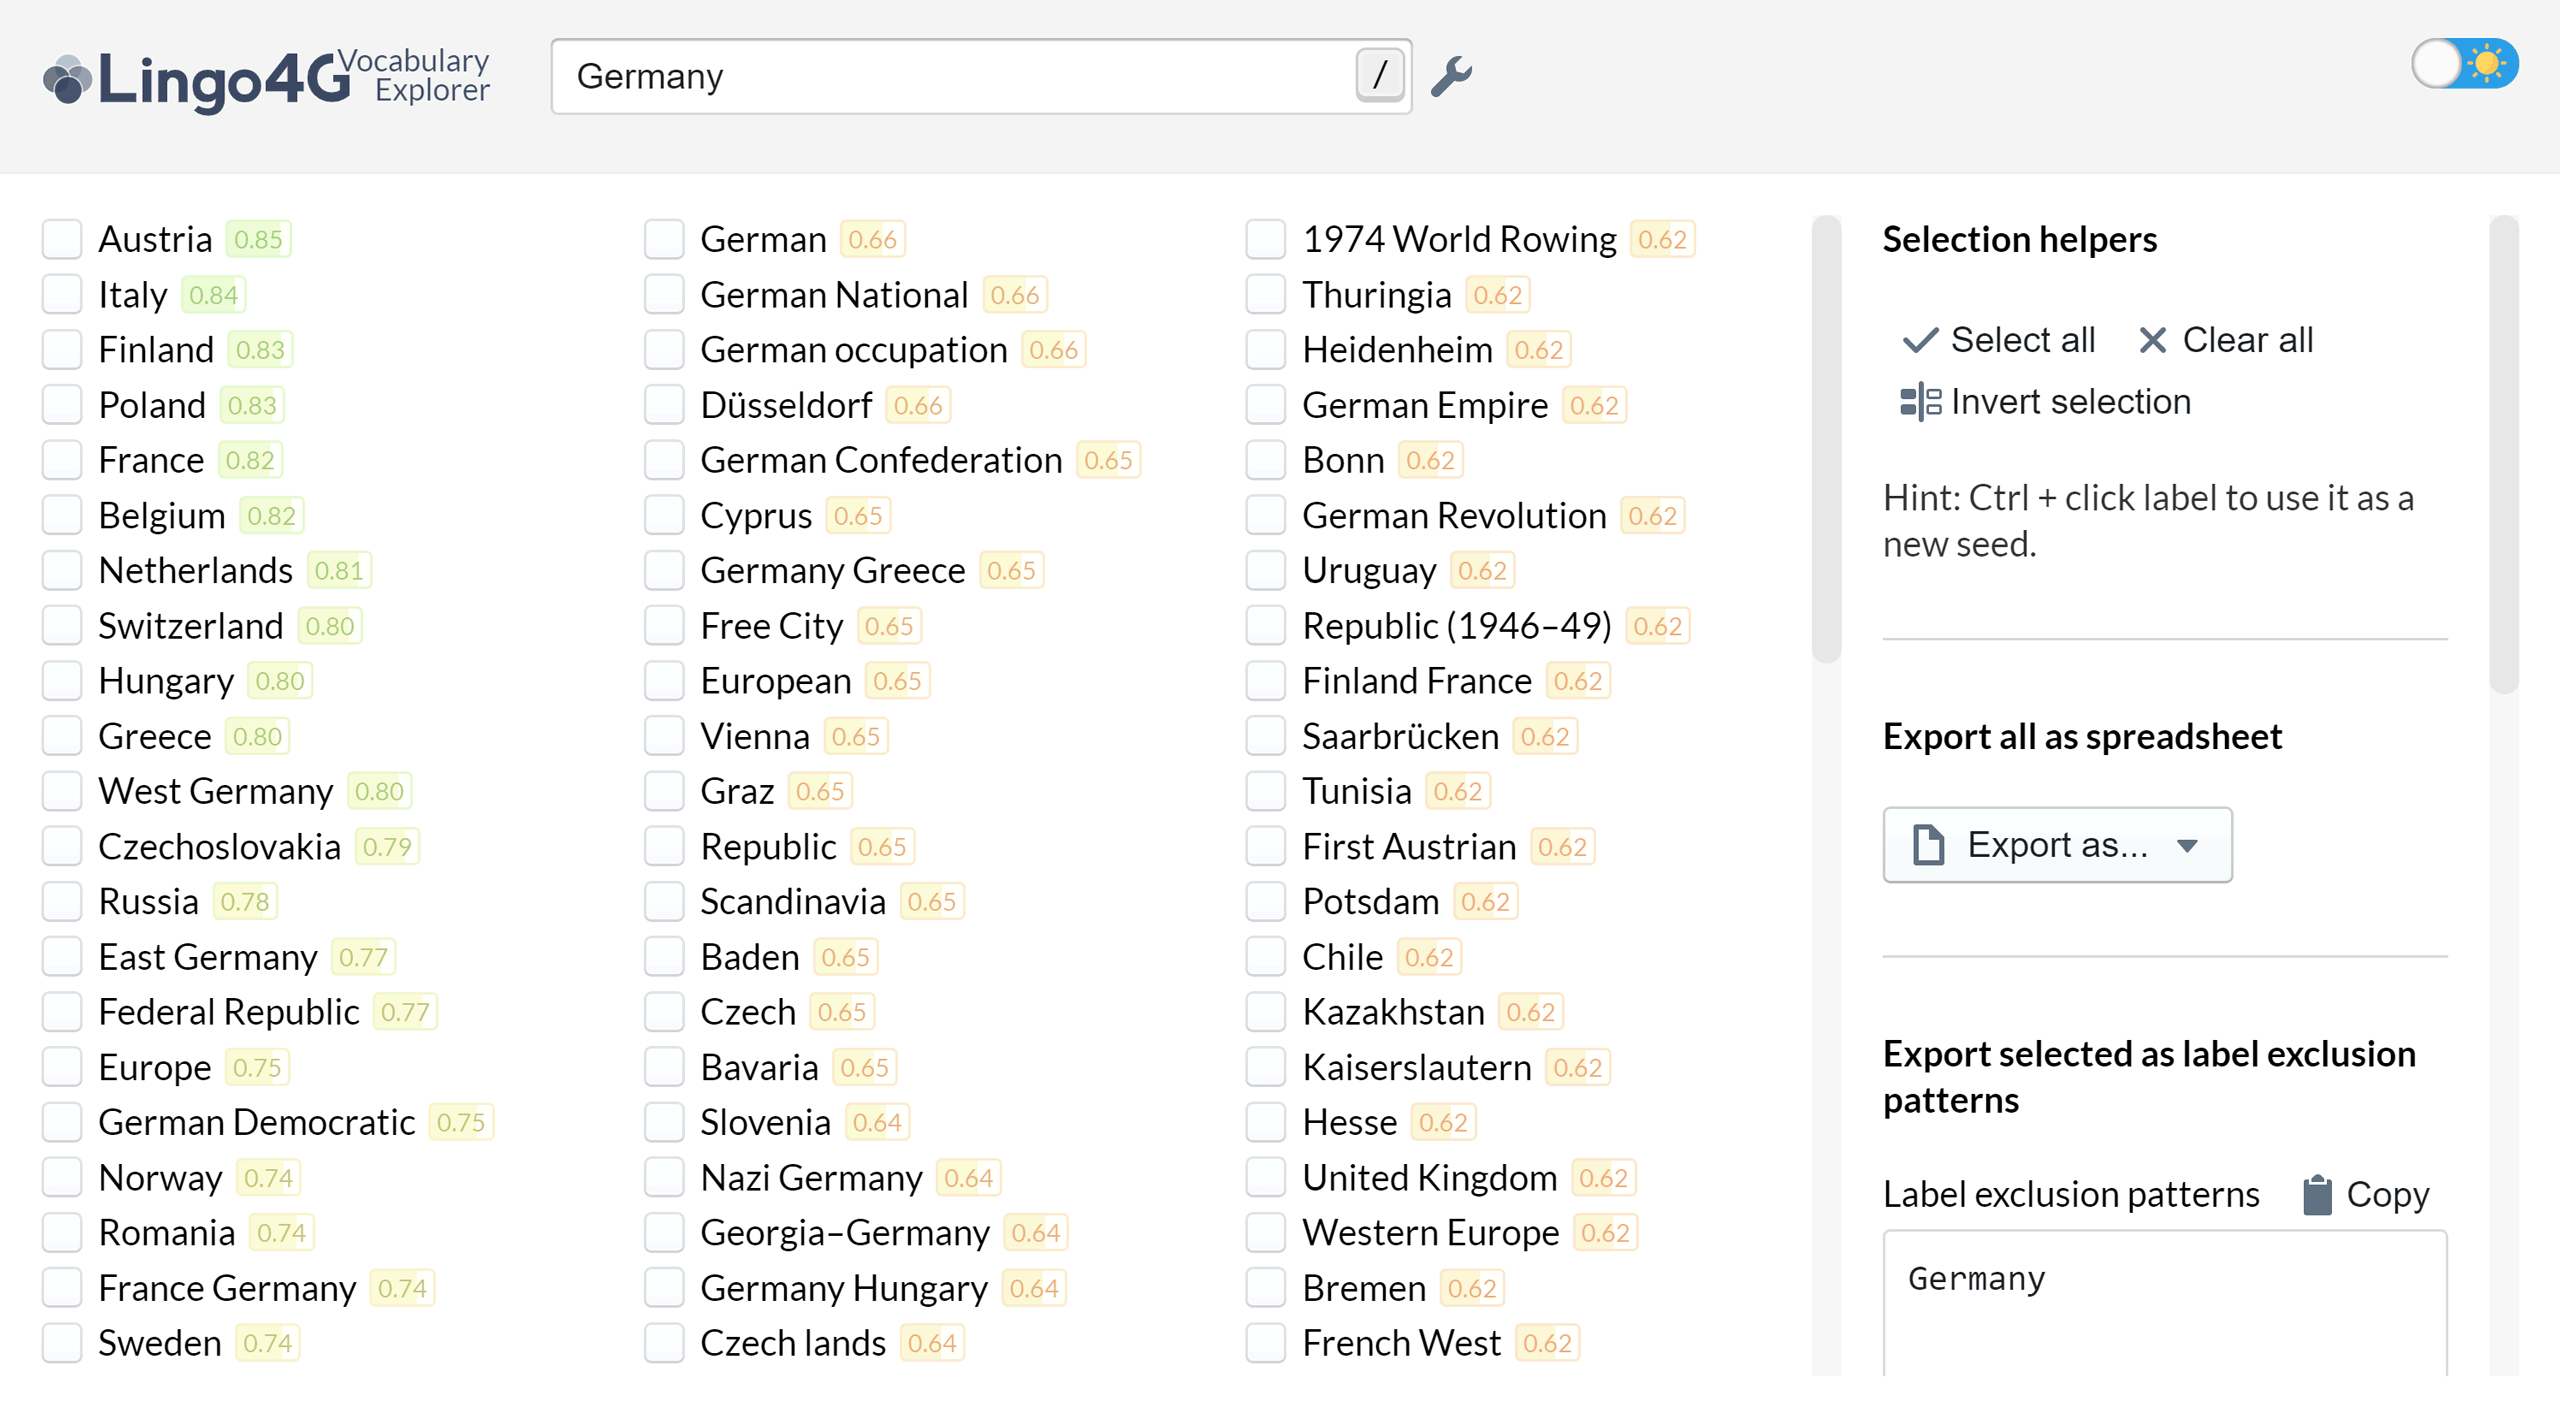 A list of labels semantically similar to Germany, based on English Wikipedia.